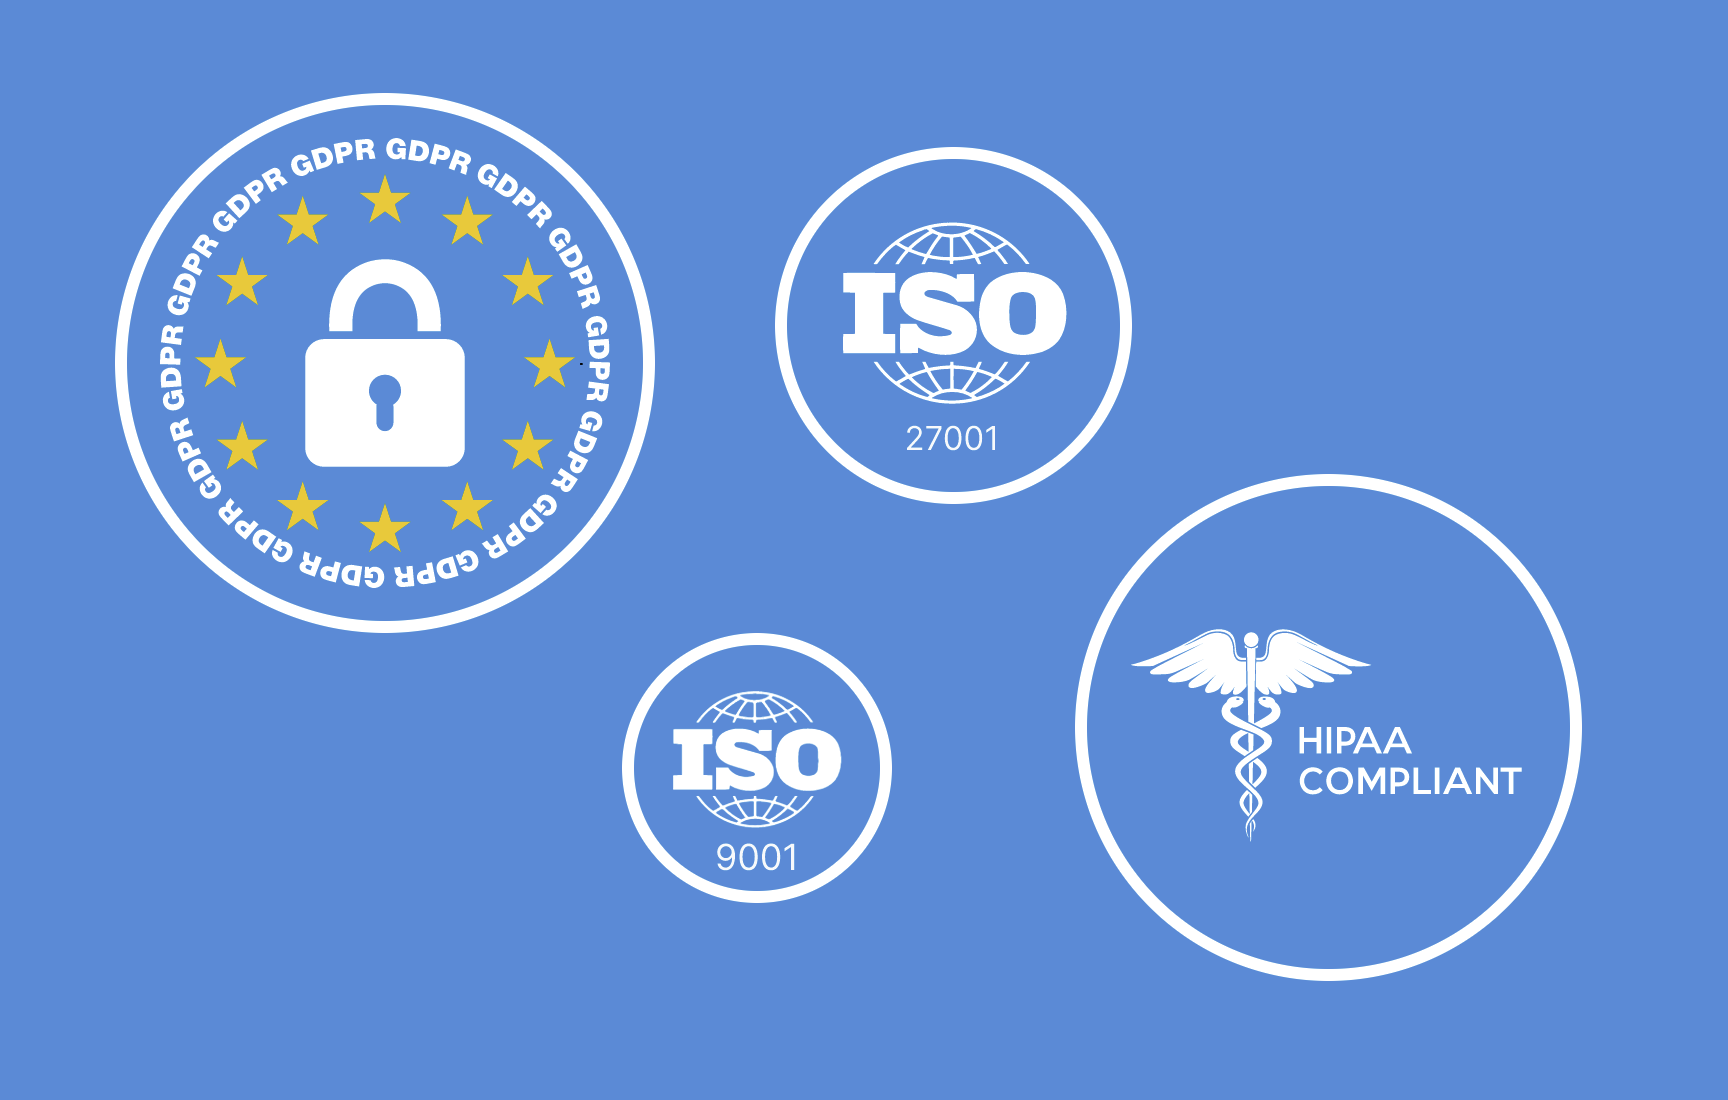 Certified GDPR, ISO 27001 Compliant, and CCPA